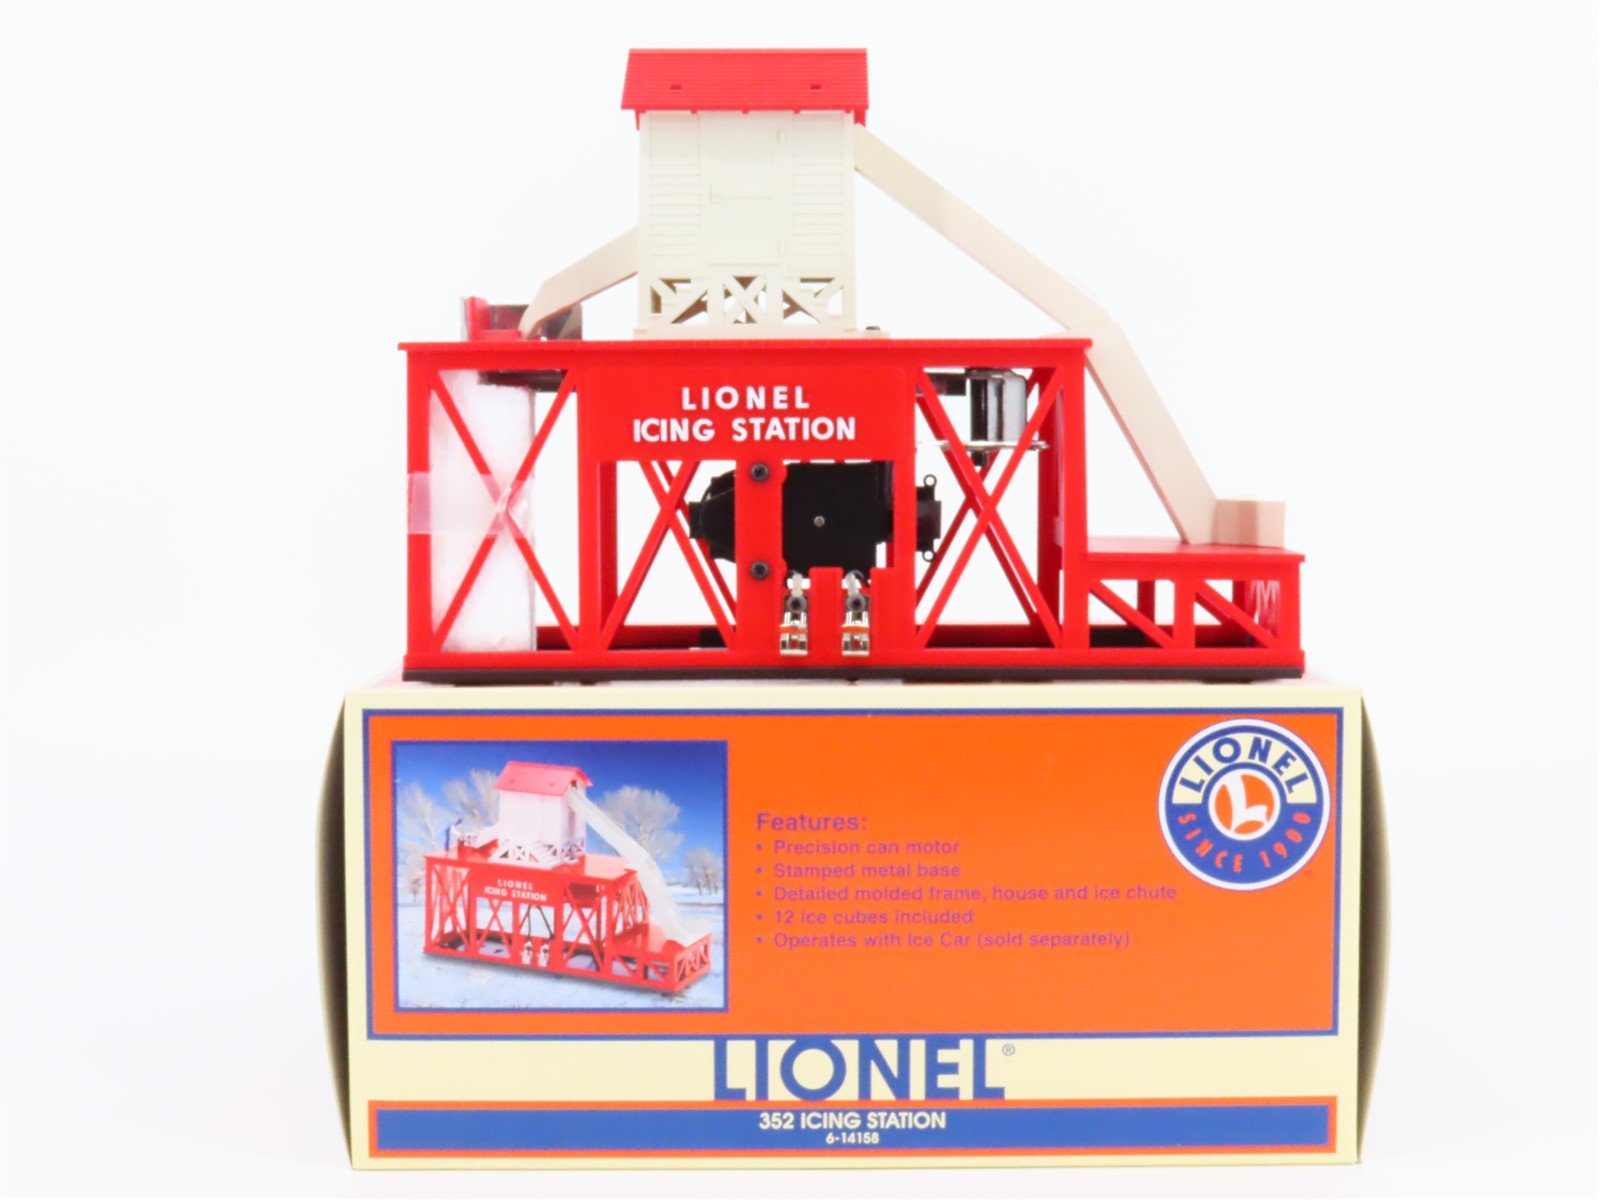 O 1/48 Scale Lionel 6-14158 Icing Station #352 Building